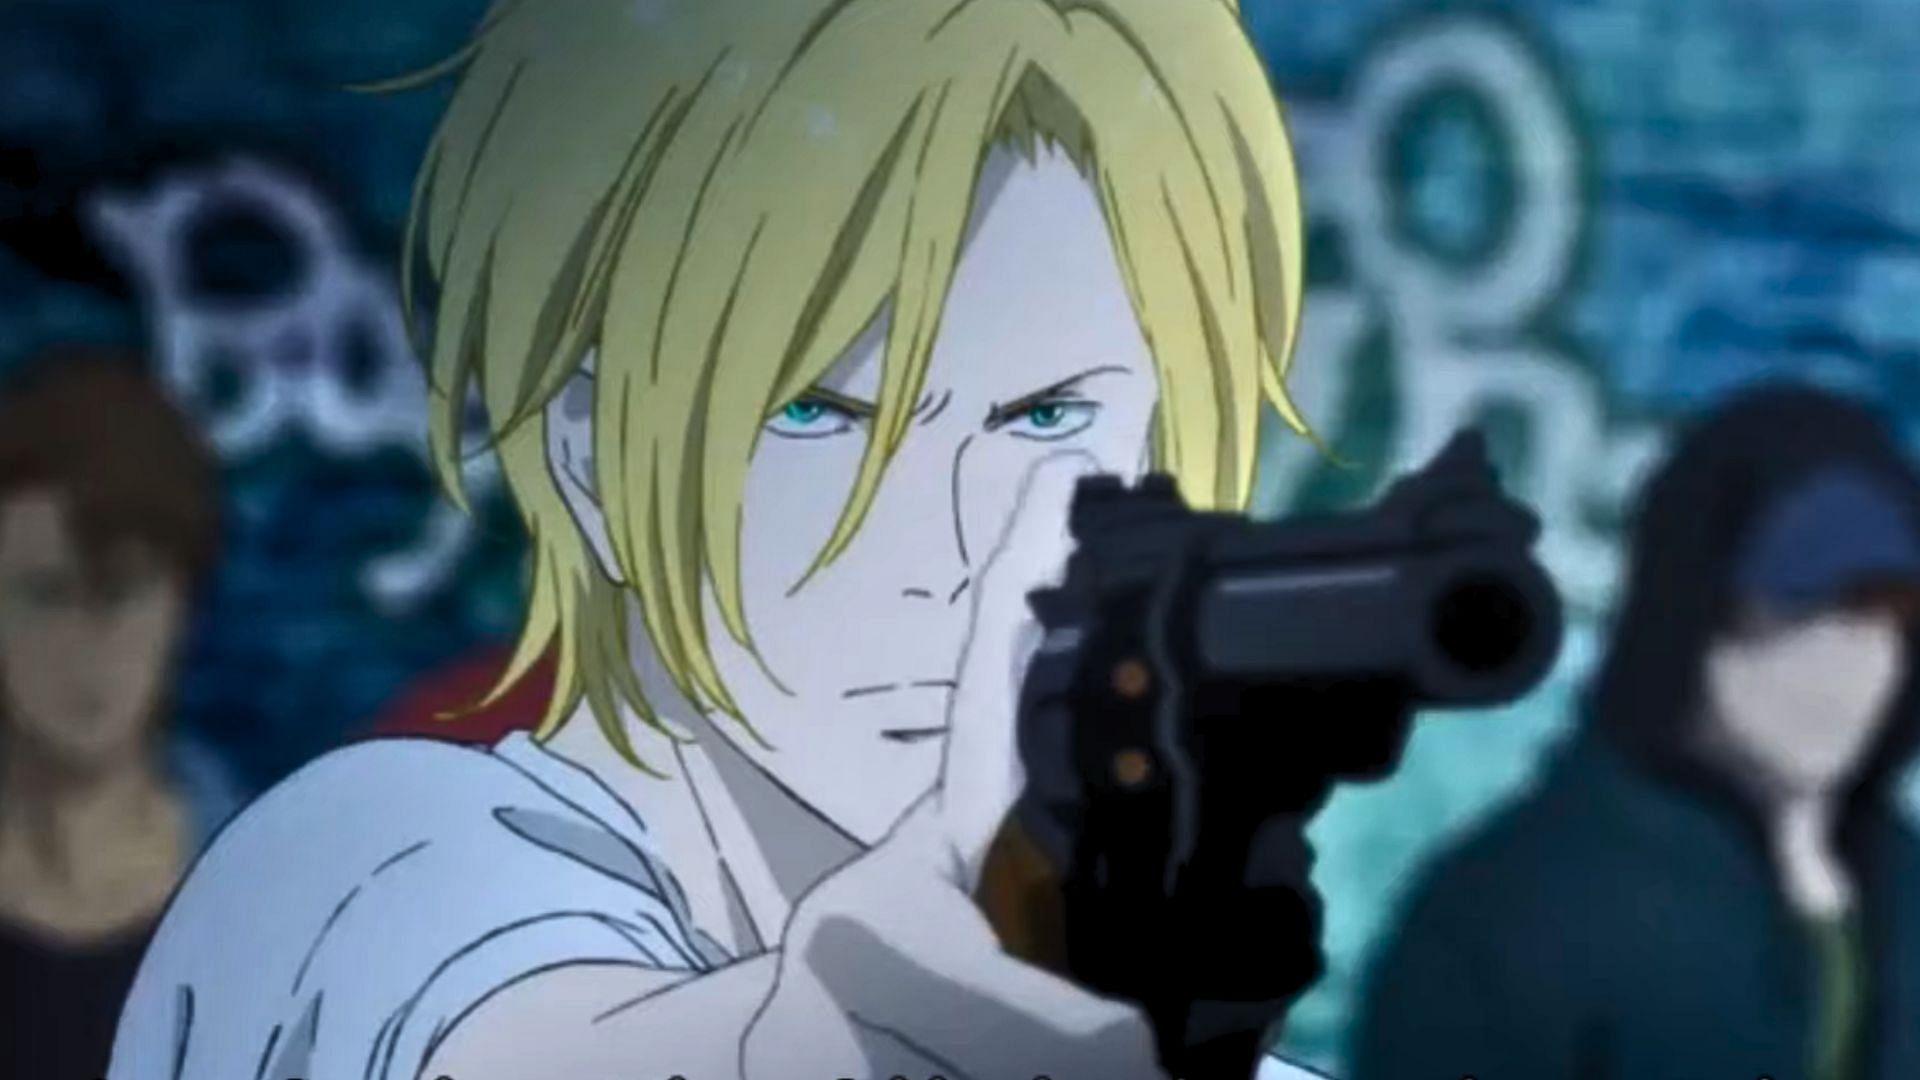 A Deeper Look At Banana Fish From Studio MAPPA At AnimeNEXT – OTAQUEST